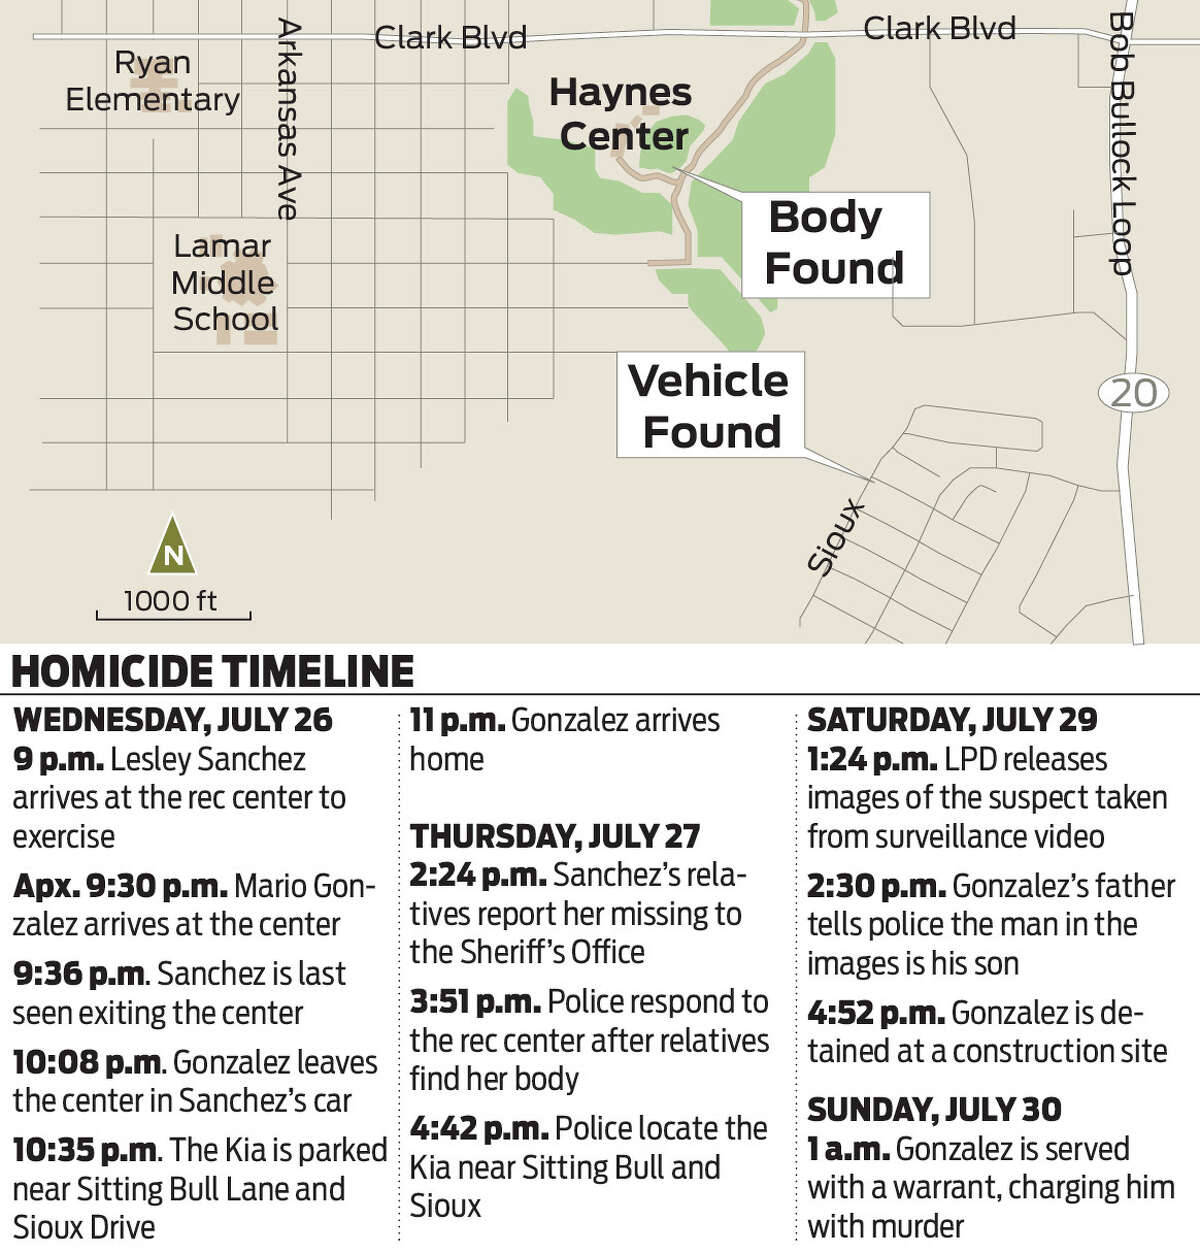 This graphic shows the timeline of events in the homicide of Lesley Sanchez.